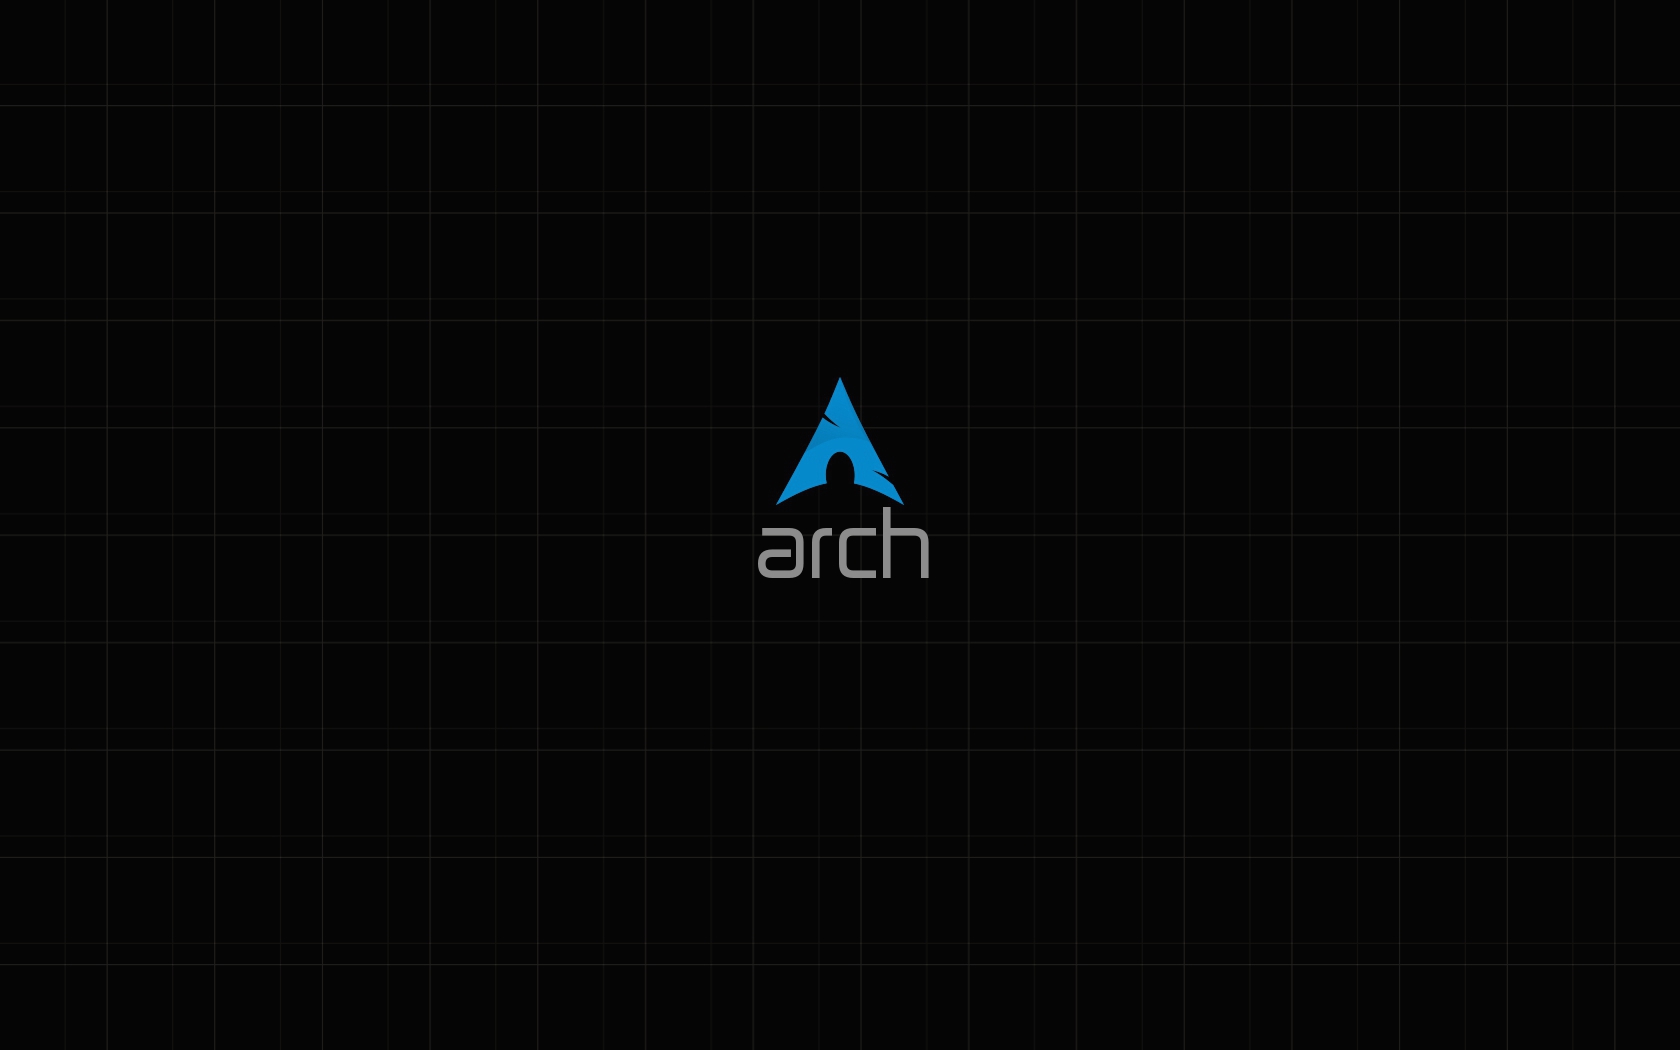 Arch Linux Desktop And Mobile Wallpaper Wallippo